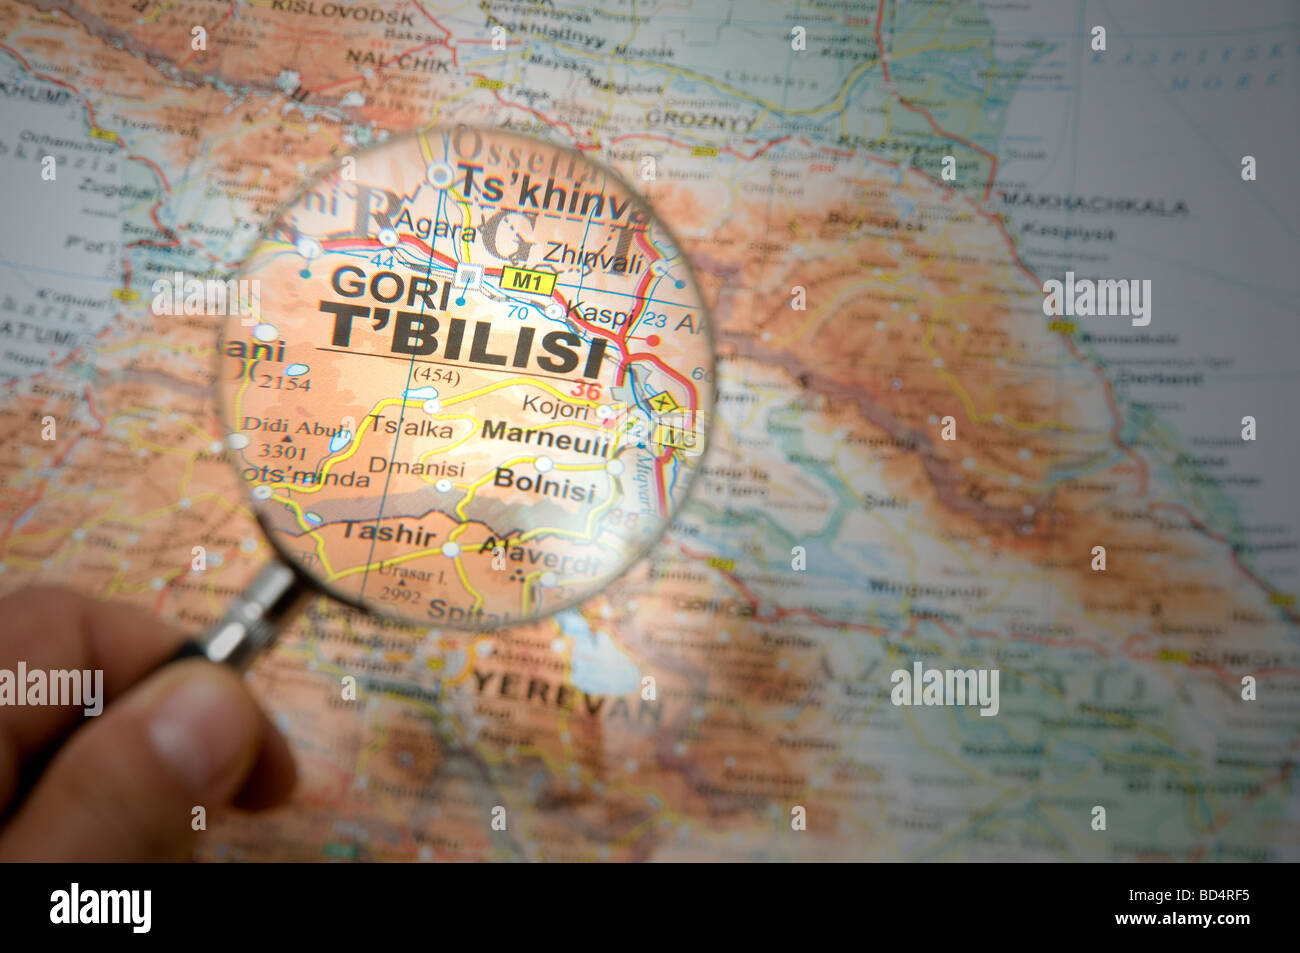 a look at the city of Tbilisi on the map Stock Photo